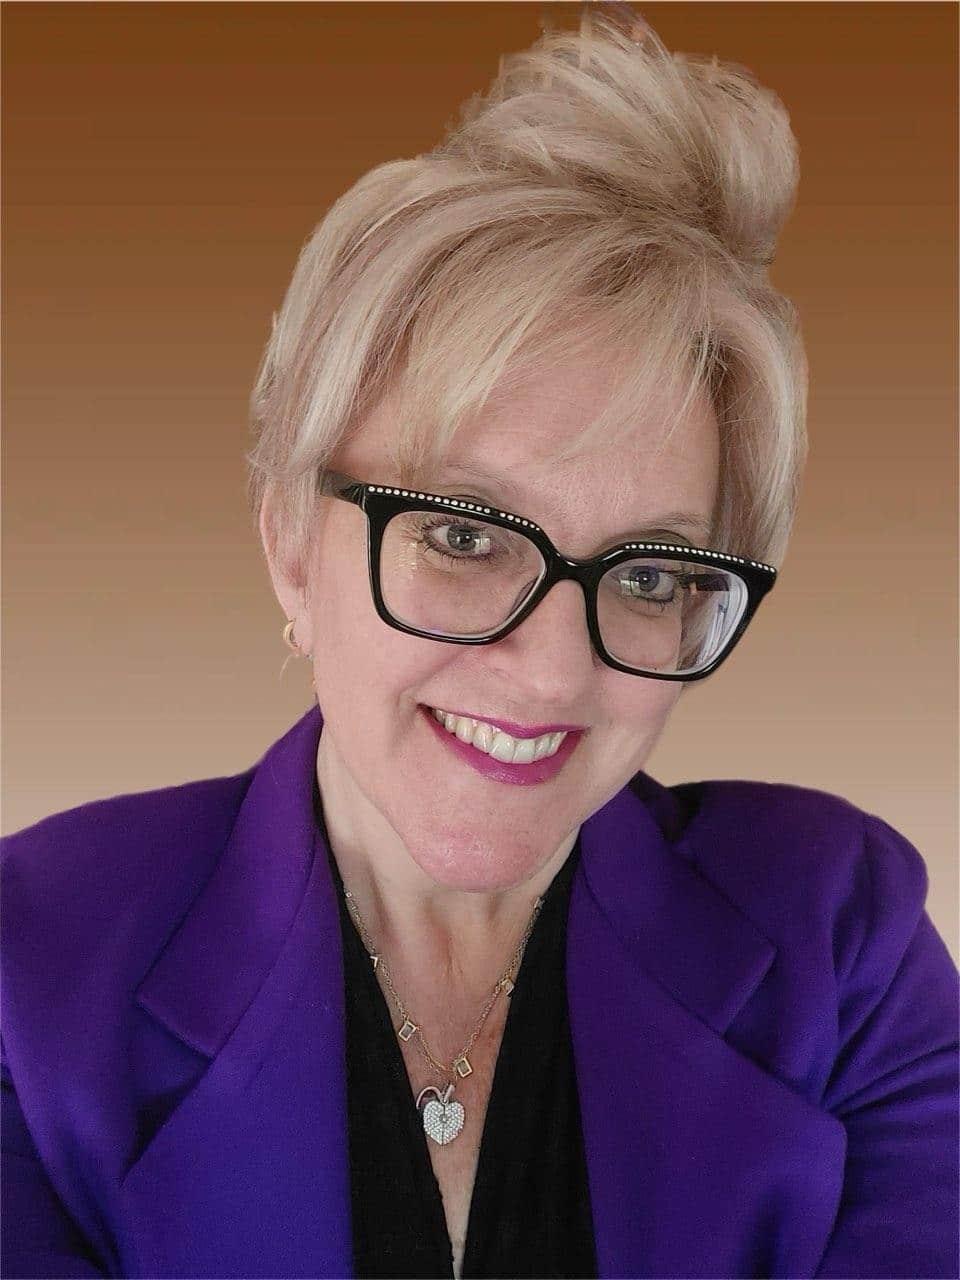 A blonde woman with her hair in a bun is smiling. She wears a purple suit coat and black glasses.